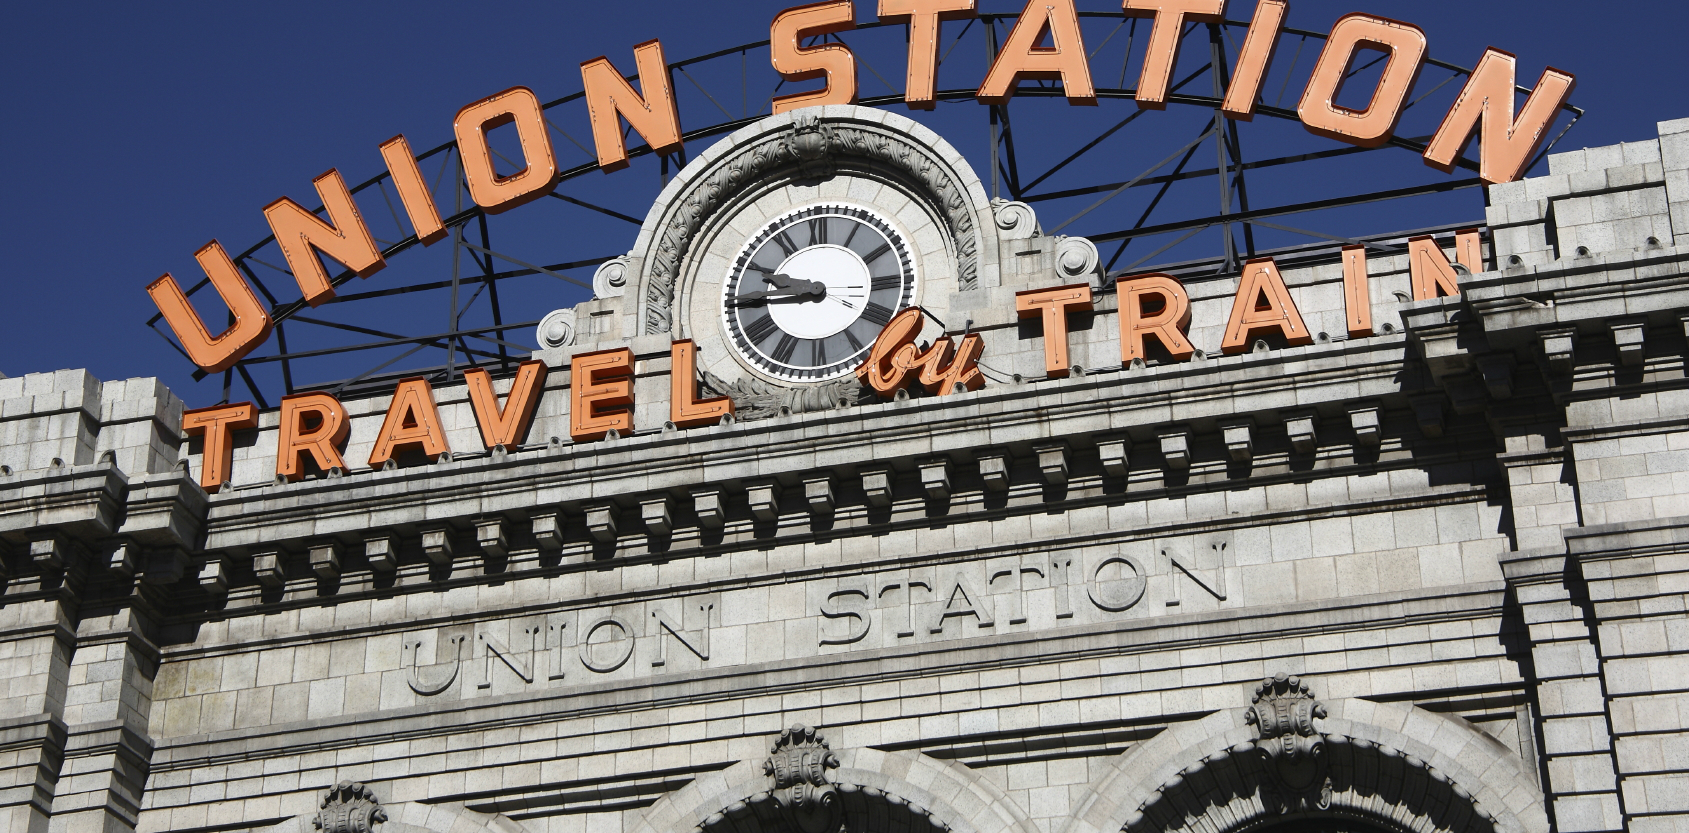 Take the Scenic California Zephyr to #SuperBowl50